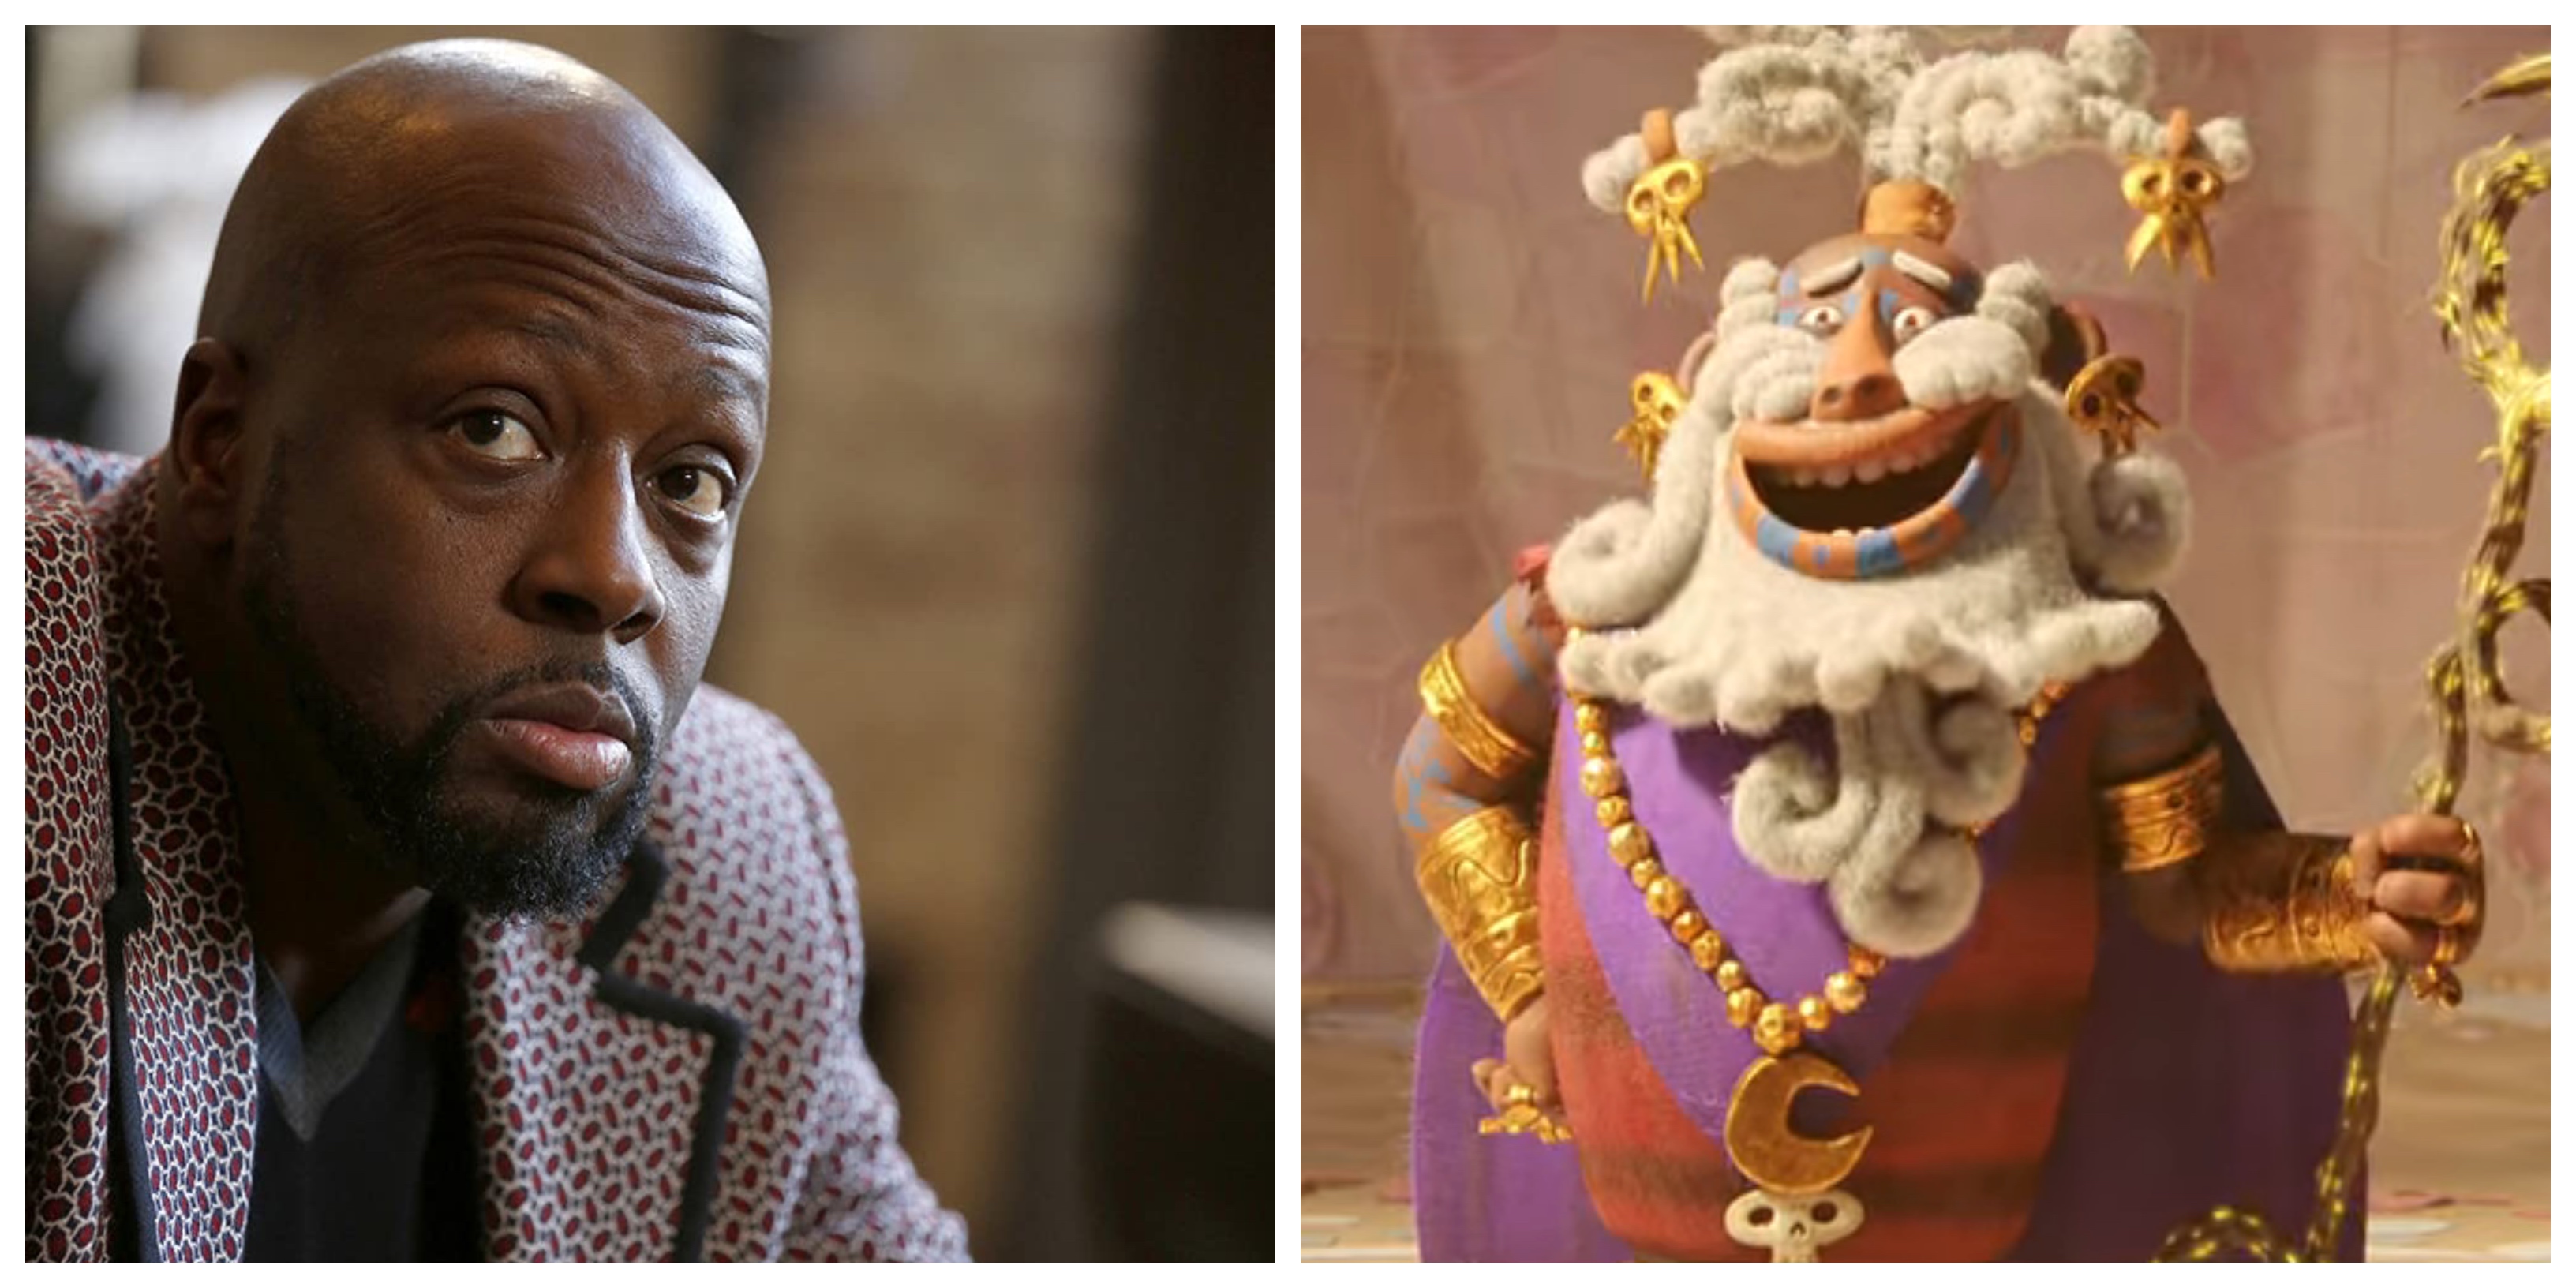 Maya and the Three Voice Cast - Wyclef Jean as Gran Brujo